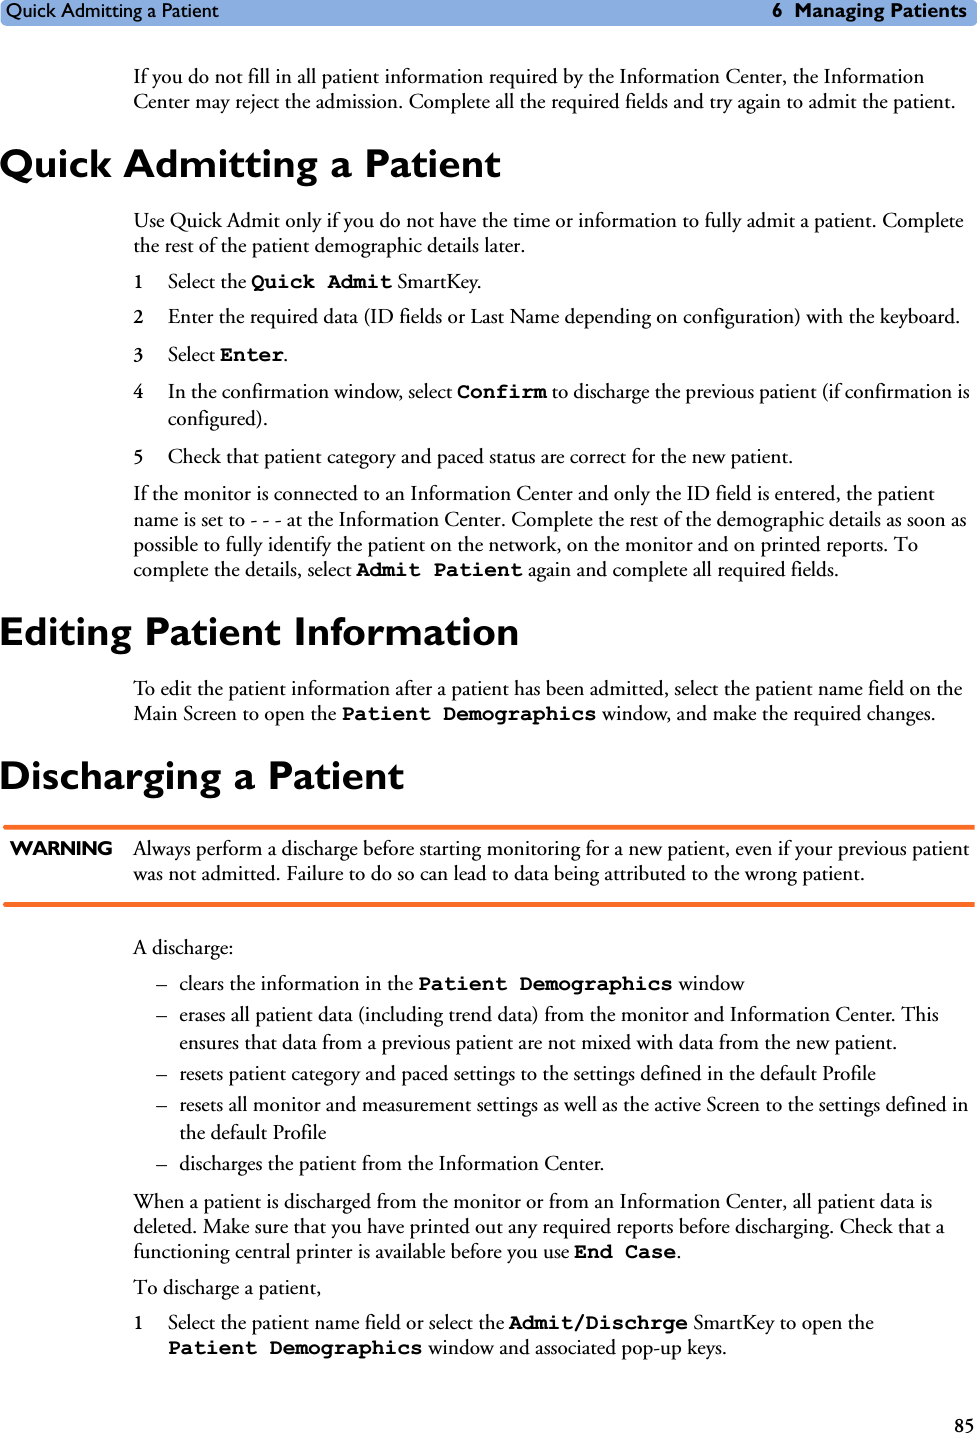 Quick Admitting a Patient 6 Managing Patients85If you do not fill in all patient information required by the Information Center, the Information Center may reject the admission. Complete all the required fields and try again to admit the patient.Quick Admitting a PatientUse Quick Admit only if you do not have the time or information to fully admit a patient. Complete the rest of the patient demographic details later.1Select the Quick Admit SmartKey.2Enter the required data (ID fields or Last Name depending on configuration) with the keyboard.3Select Enter.4In the confirmation window, select Confirm to discharge the previous patient (if confirmation is configured). 5Check that patient category and paced status are correct for the new patient.If the monitor is connected to an Information Center and only the ID field is entered, the patient name is set to - - - at the Information Center. Complete the rest of the demographic details as soon as possible to fully identify the patient on the network, on the monitor and on printed reports. To complete the details, select Admit Patient again and complete all required fields. Editing Patient InformationTo edit the patient information after a patient has been admitted, select the patient name field on the Main Screen to open the Patient Demographics window, and make the required changes.Discharging a PatientWARNING Always perform a discharge before starting monitoring for a new patient, even if your previous patient was not admitted. Failure to do so can lead to data being attributed to the wrong patient.A discharge:– clears the information in the Patient Demographics window – erases all patient data (including trend data) from the monitor and Information Center. This ensures that data from a previous patient are not mixed with data from the new patient. – resets patient category and paced settings to the settings defined in the default Profile– resets all monitor and measurement settings as well as the active Screen to the settings defined in the default Profile– discharges the patient from the Information Center. When a patient is discharged from the monitor or from an Information Center, all patient data is deleted. Make sure that you have printed out any required reports before discharging. Check that a functioning central printer is available before you use End Case.To discharge a patient, 1Select the patient name field or select the Admit/Dischrge SmartKey to open the Patient Demographics window and associated pop-up keys.